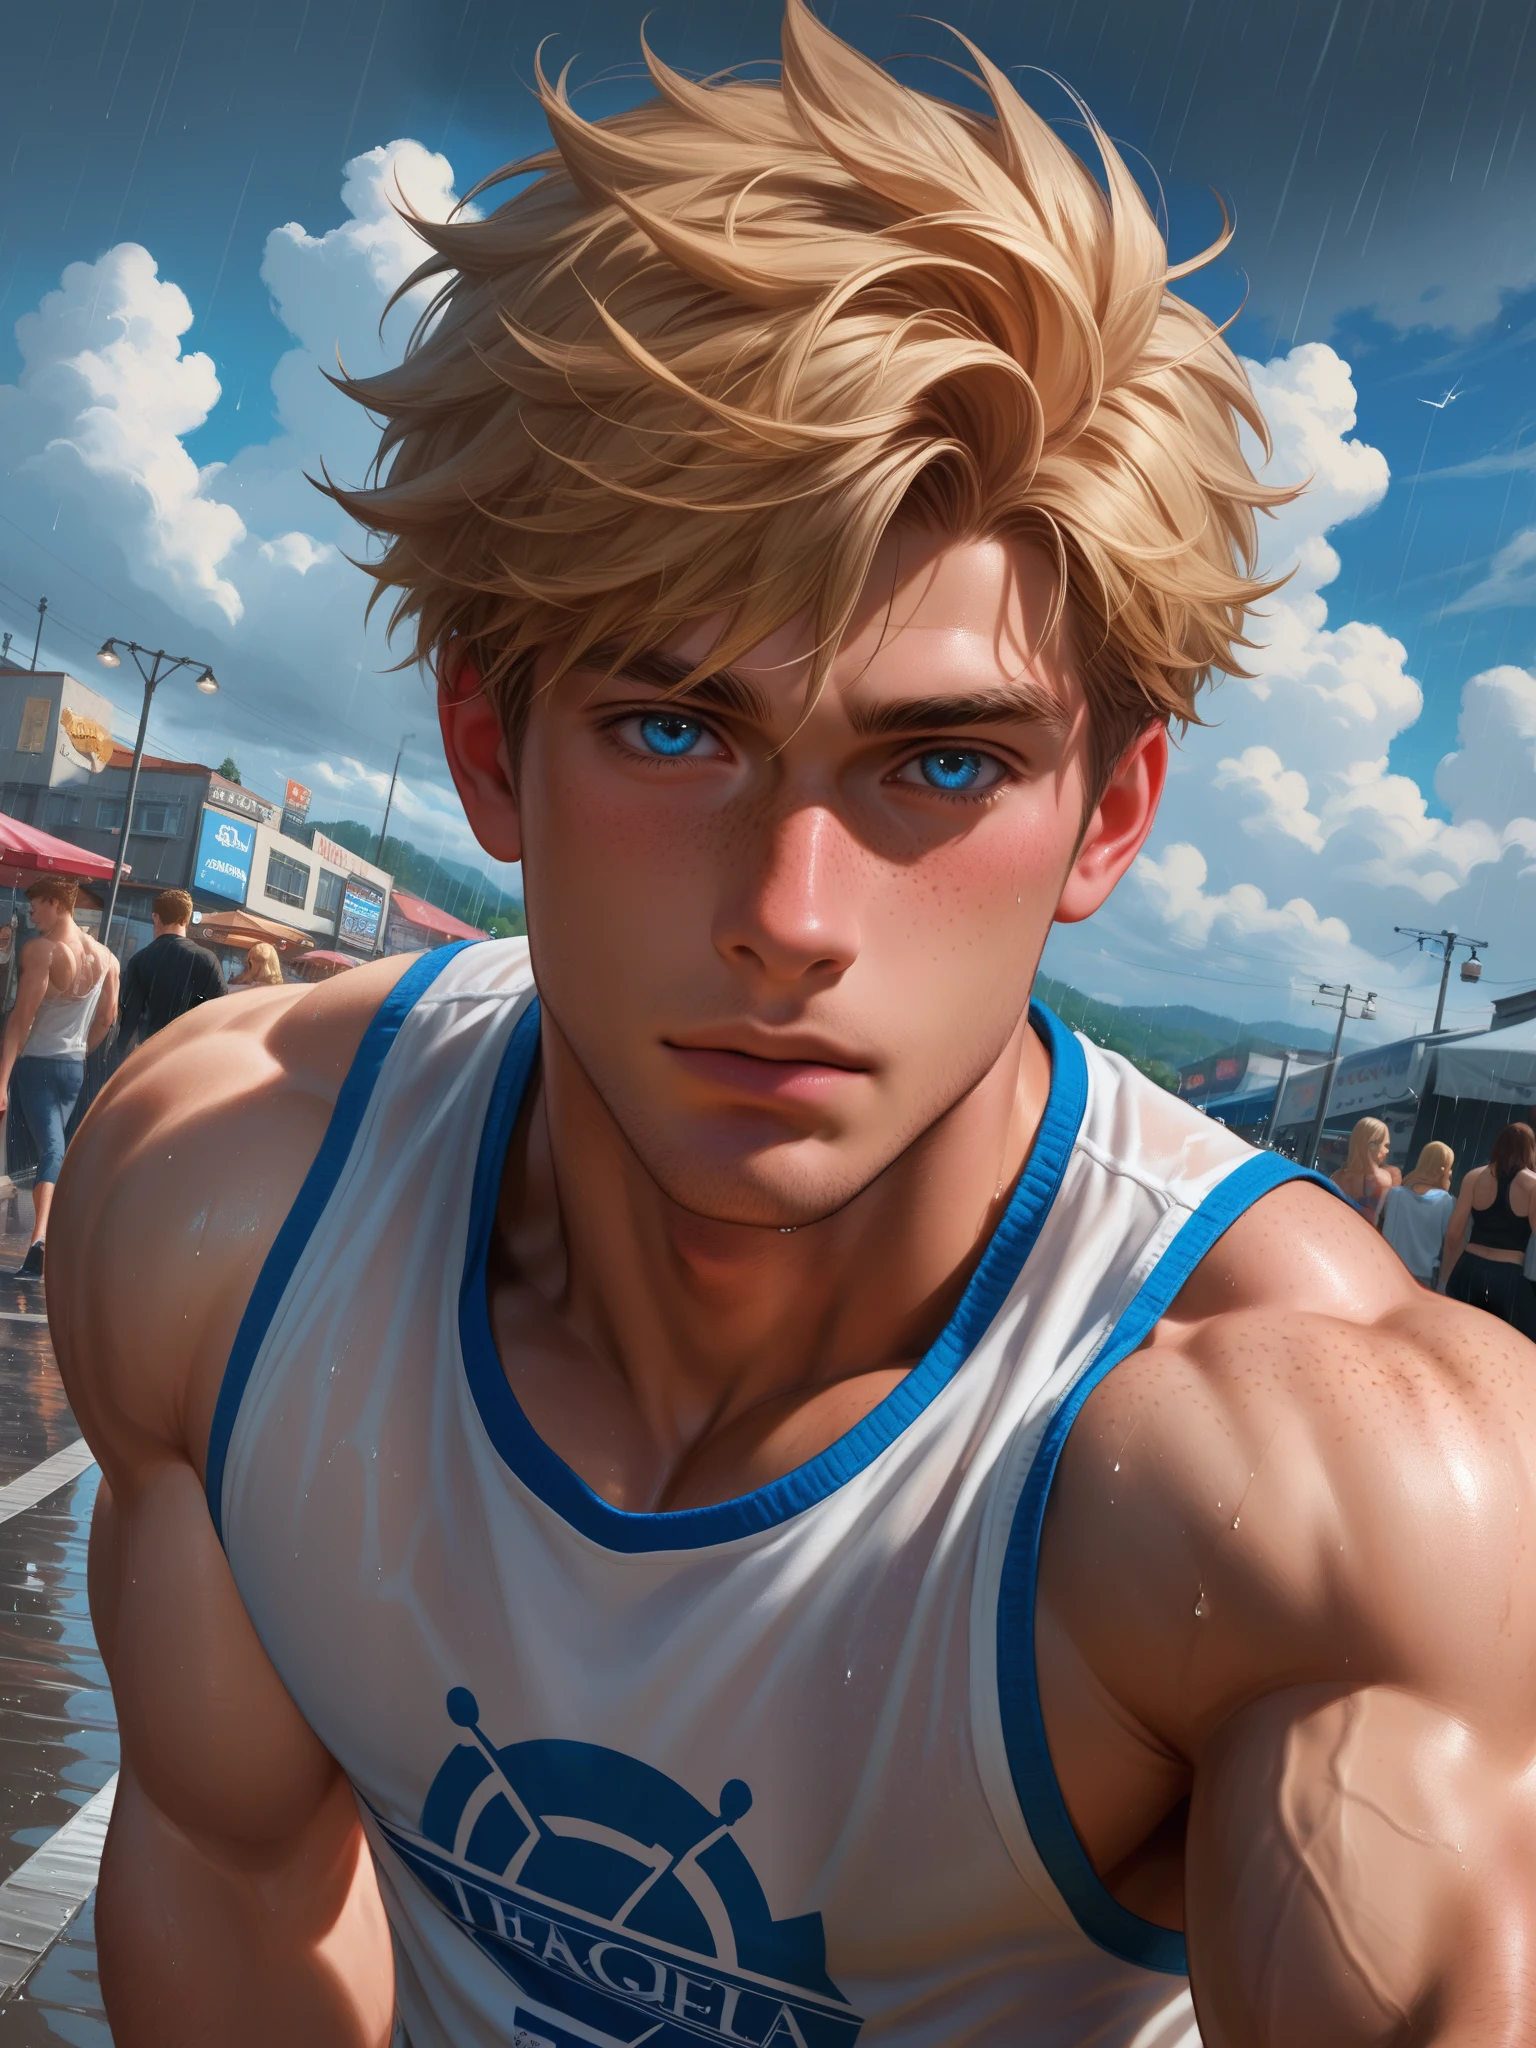 8k,score_9,score_8_up,score_7_up, yaoi, 1boys,gay, detailed, very short hair, blonde hair, freckles, blue eyes, freckles, freckles on body, muscle wide shoulders, muscle pecs, abs, vascular biceps and triceps,flanel shirt, cute, blondlust, boyish face, cute face,above perspective, looking at viewer, rain, cloudy sky, rain street
